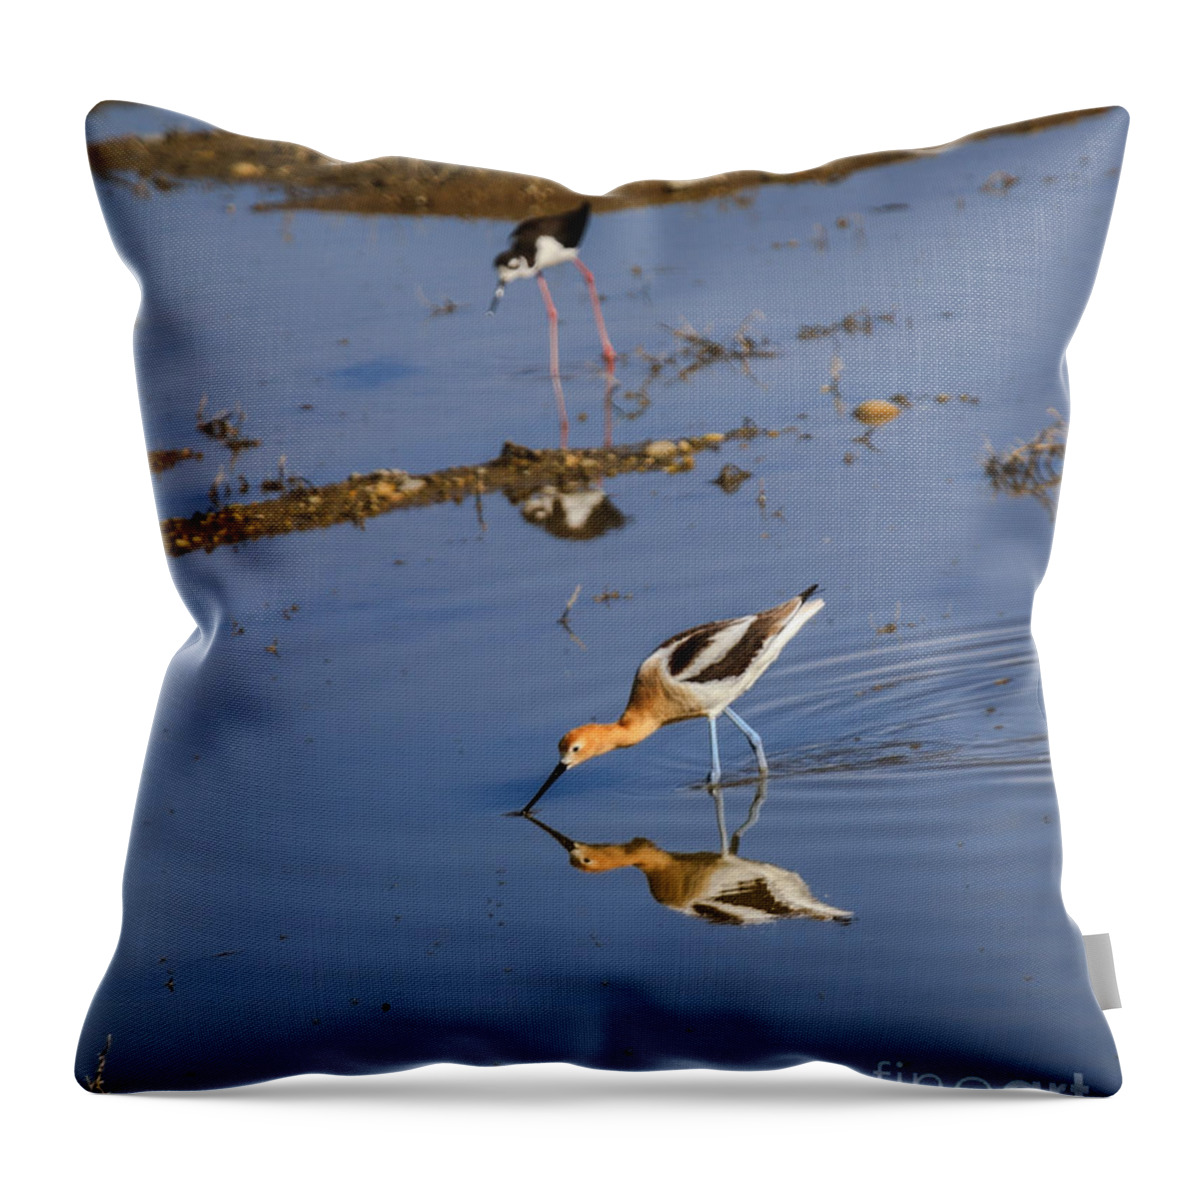 Wildlife Throw Pillow featuring the photograph American Avocet Searching For Food by Robert Bales